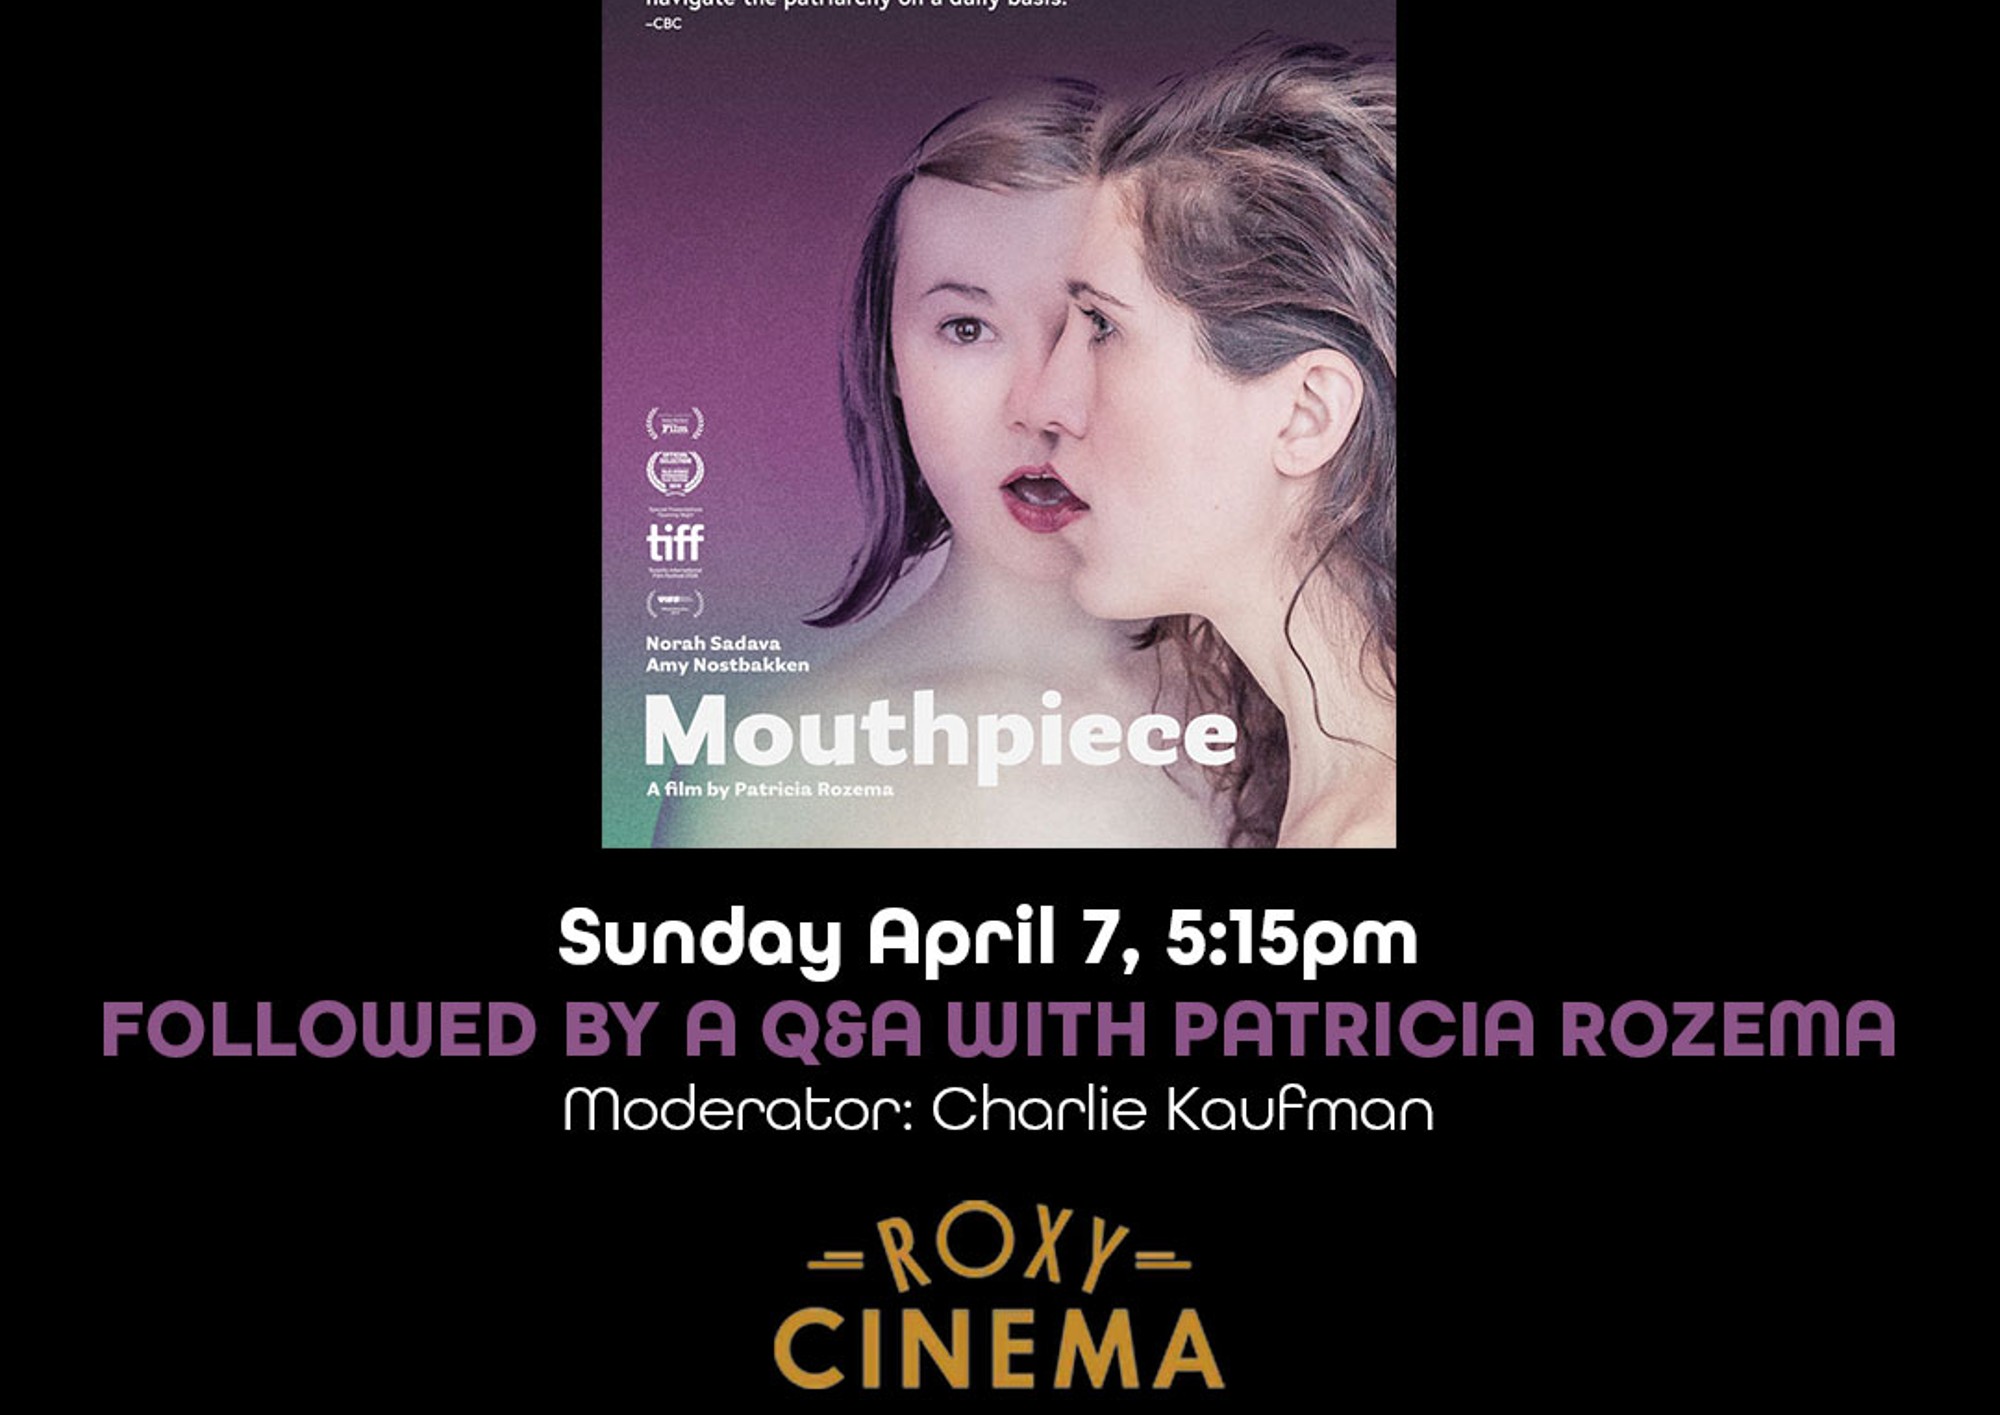 Poster advertising Patricia Rozema and Charlie Kaufman Q&A for the film Mouthpiece